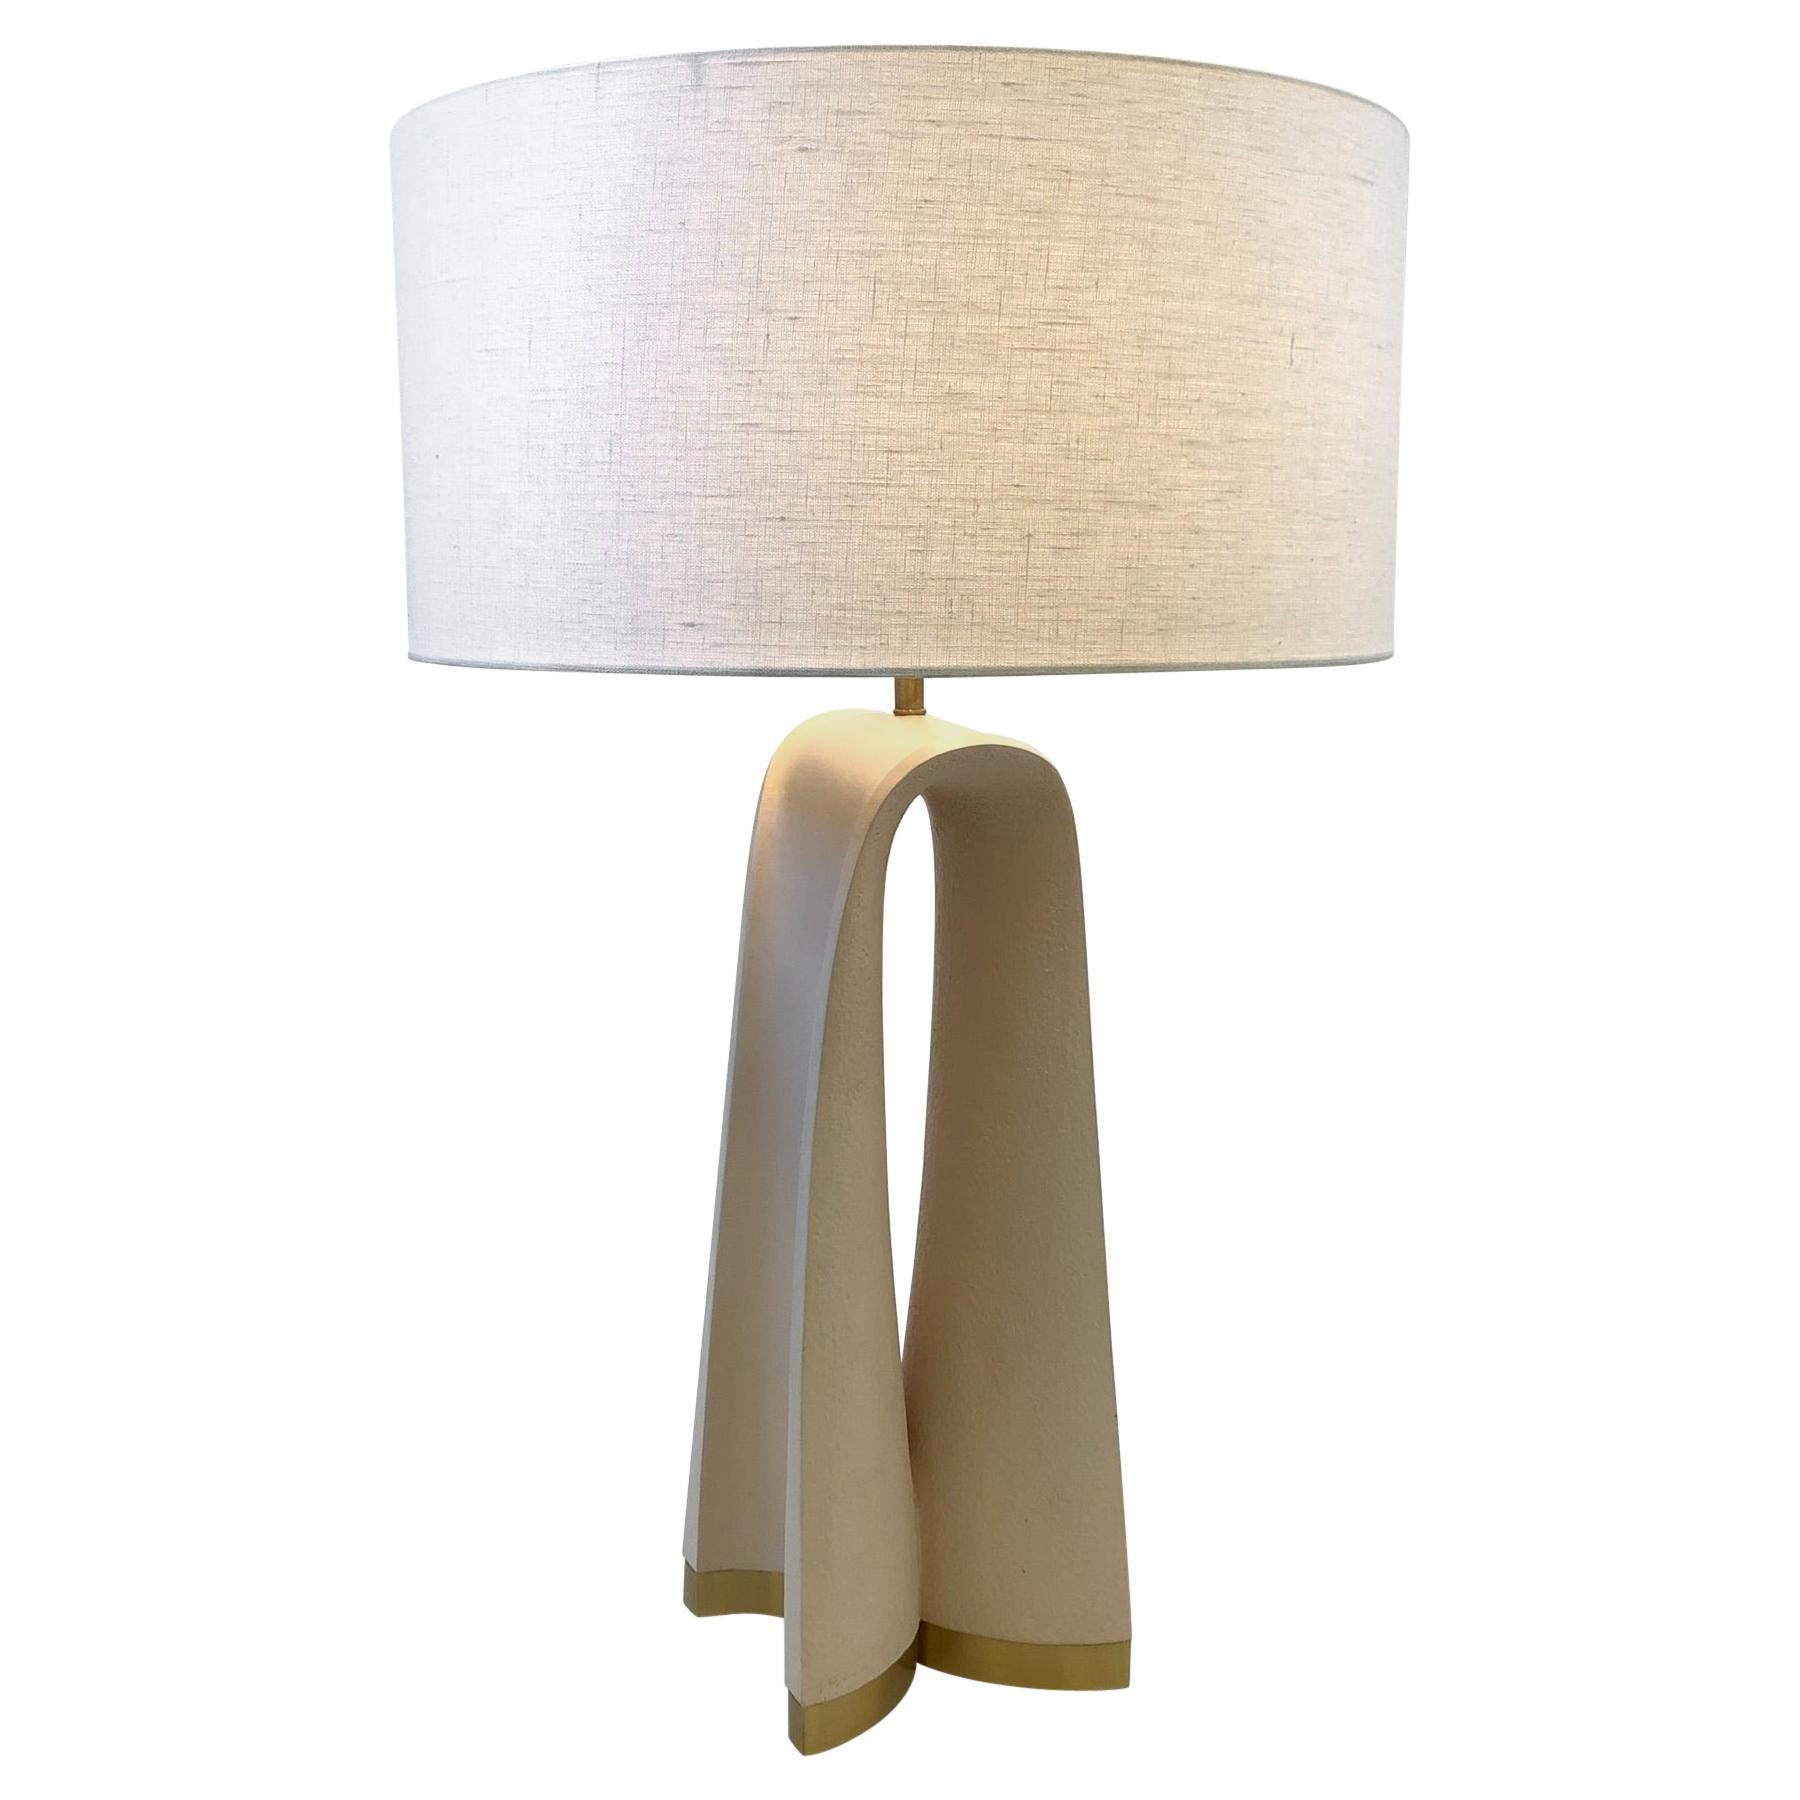 Brass and Sculpted Plaster Table Lamp by Boyd Lighting